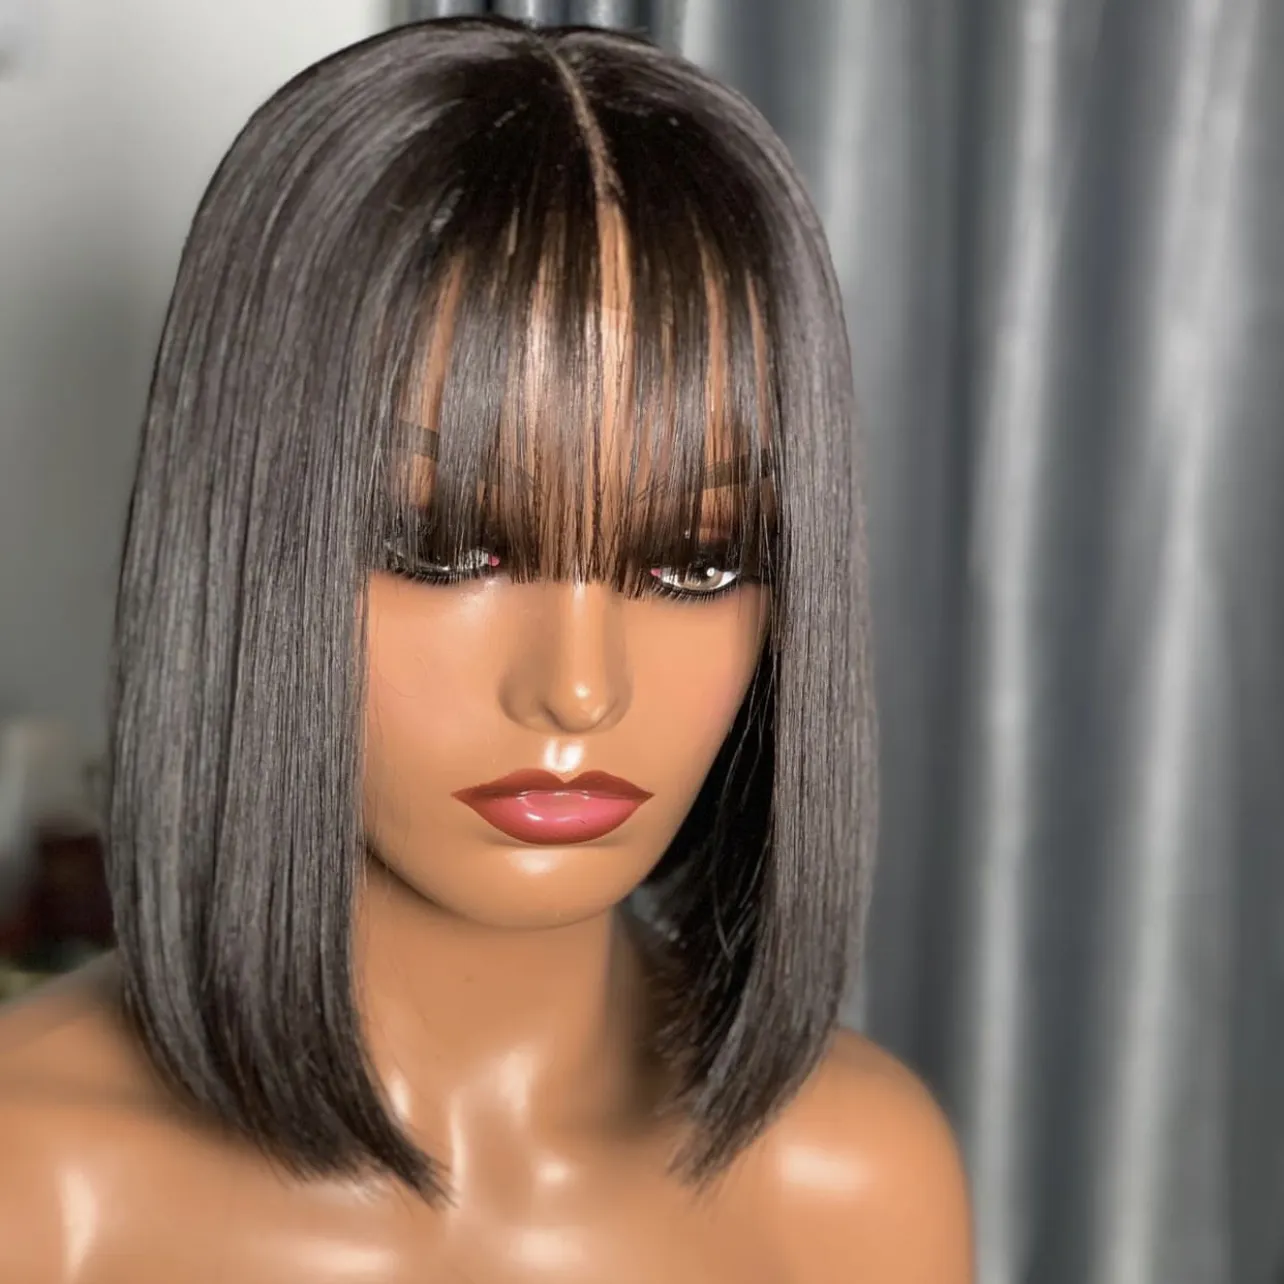 JoyWigs 100% Virgin Remy Human Hair Wigs Glueless Bang Blunt Cut Natural Color Lace Front Wigs Brazilian Hair Swiss Lace 12